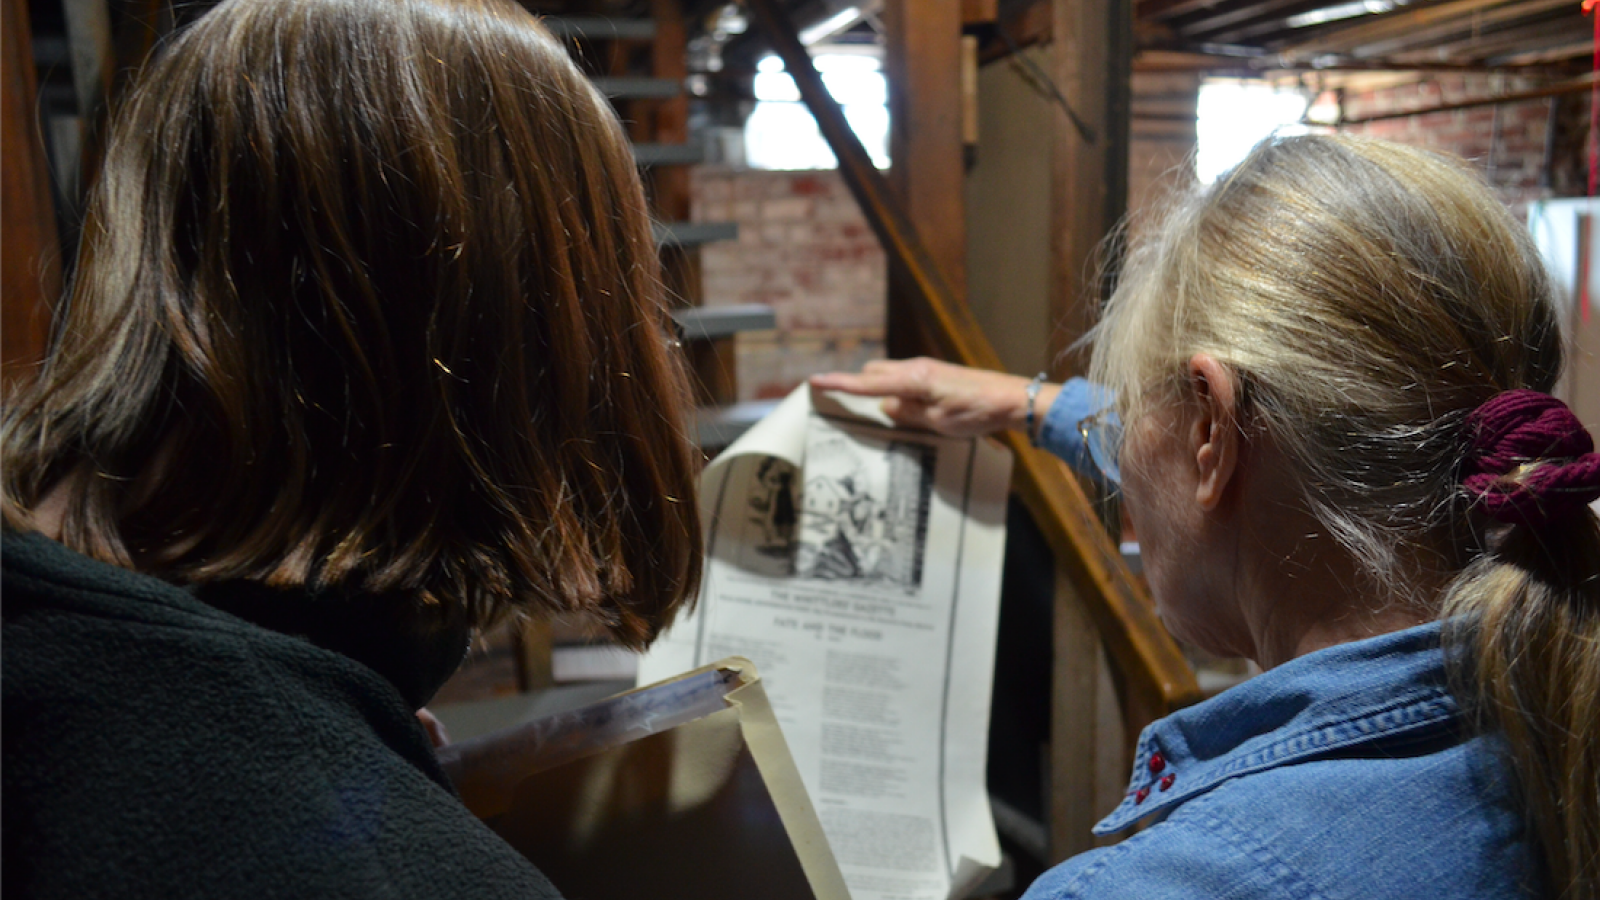 Pat Smith and fieldworker Stephanie Fannin looking at files in the collection.